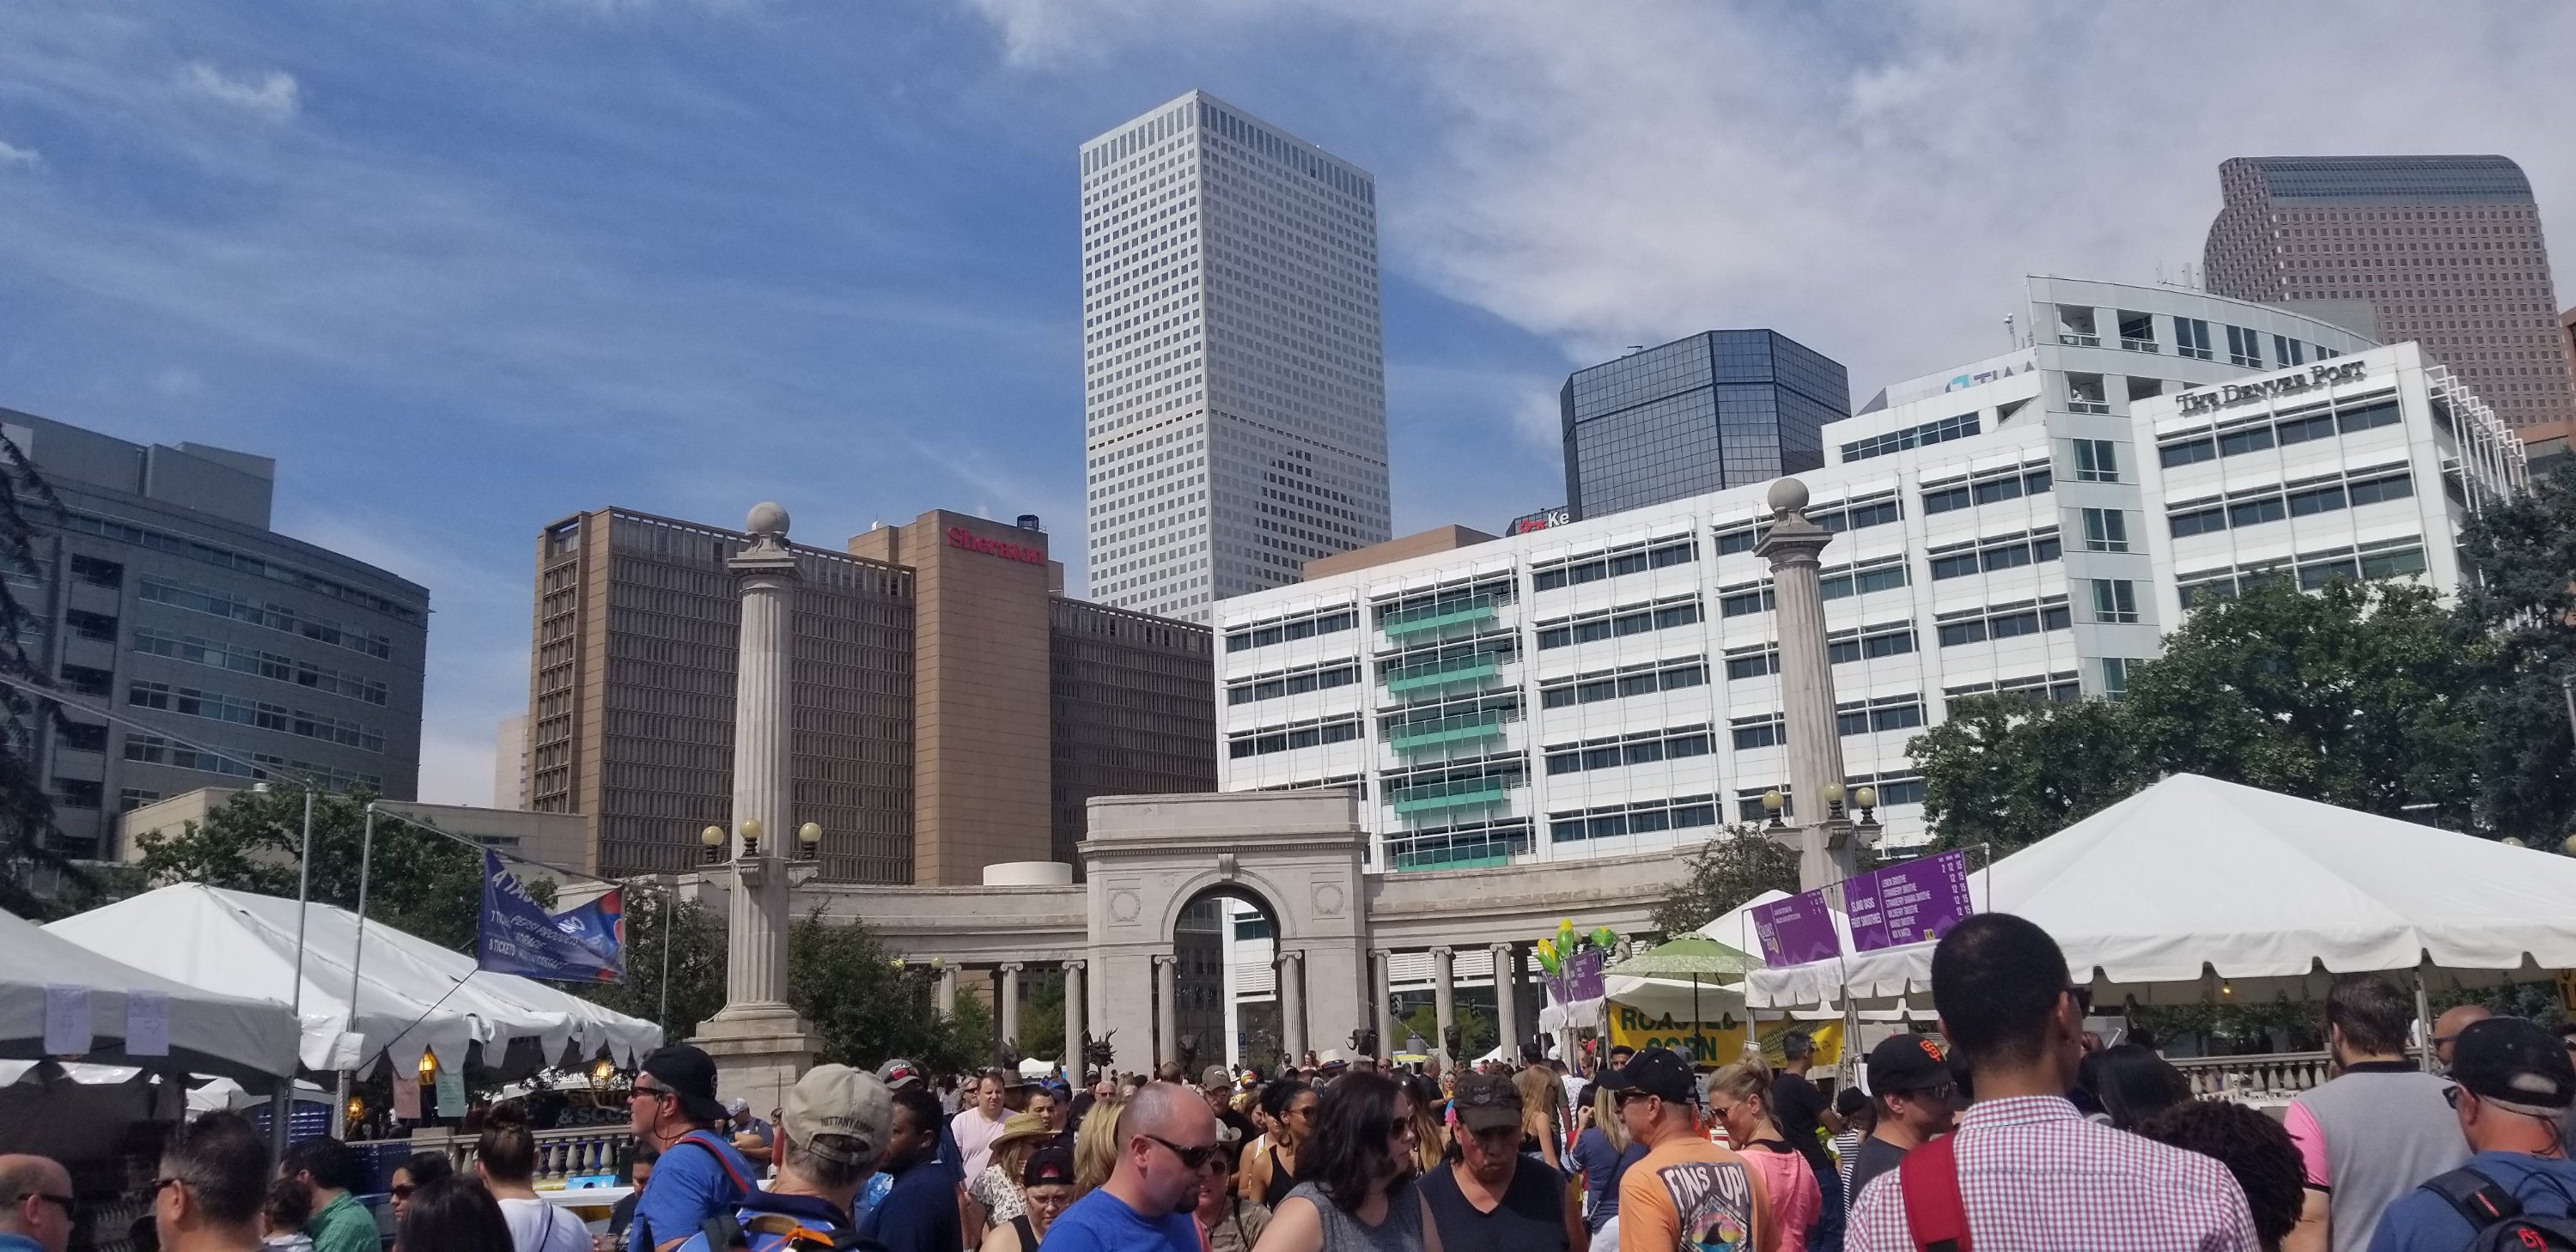 Taste of Colorado 2018 in downtown Denver on Sunday, September 2. Photo by: Matthew McGuire